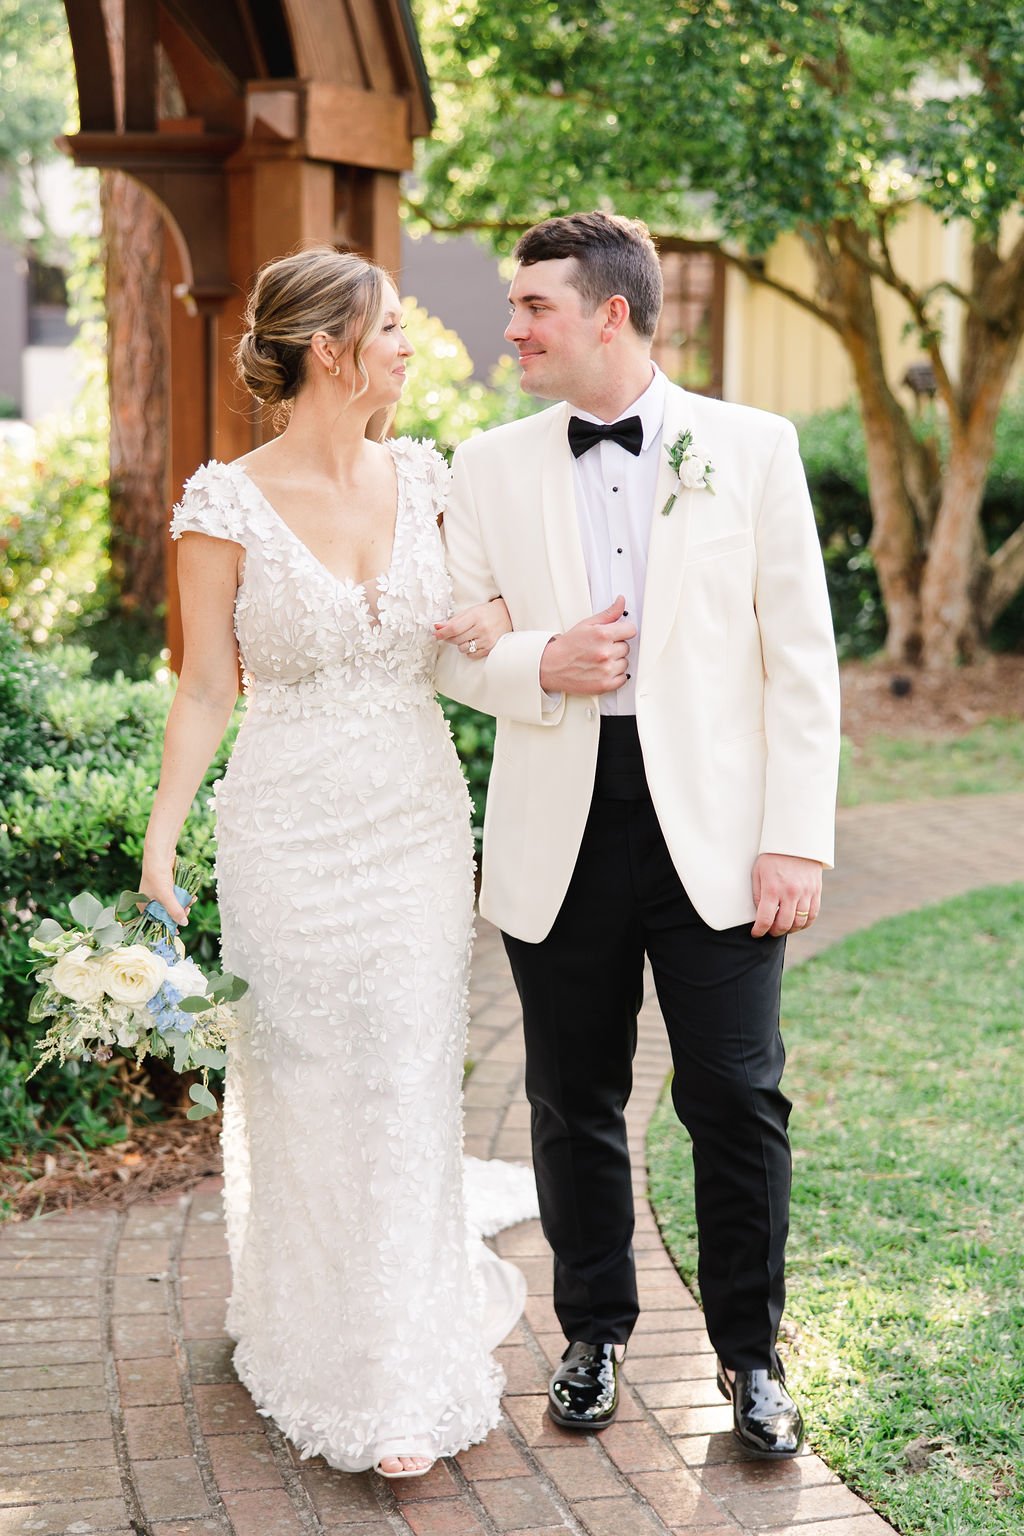 savannah-bride-katelyn-in-darcy-by-made-with-love-a-chic-modern-wedding-dress-witth-cap-sleeves-and-3d-floral-applique-purchased-from-savannah-bridal-shop-ivory-and-beau-4.jpg